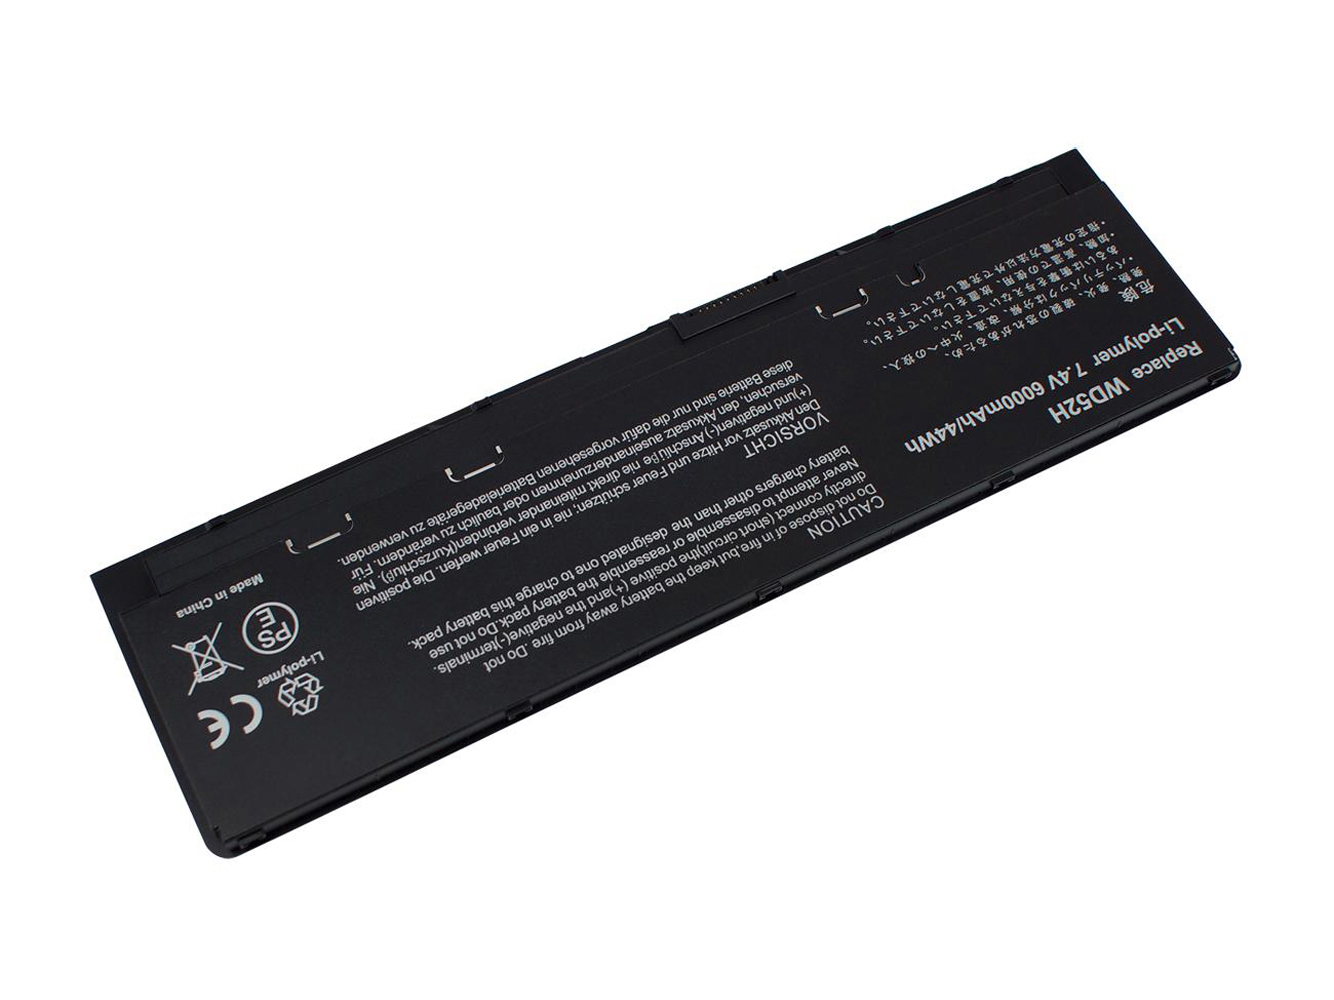 0KWFFN, 451-BBFT replacement Laptop Battery for Dell Latitude E7250, 4 cells, 6000mAh, 7.40V